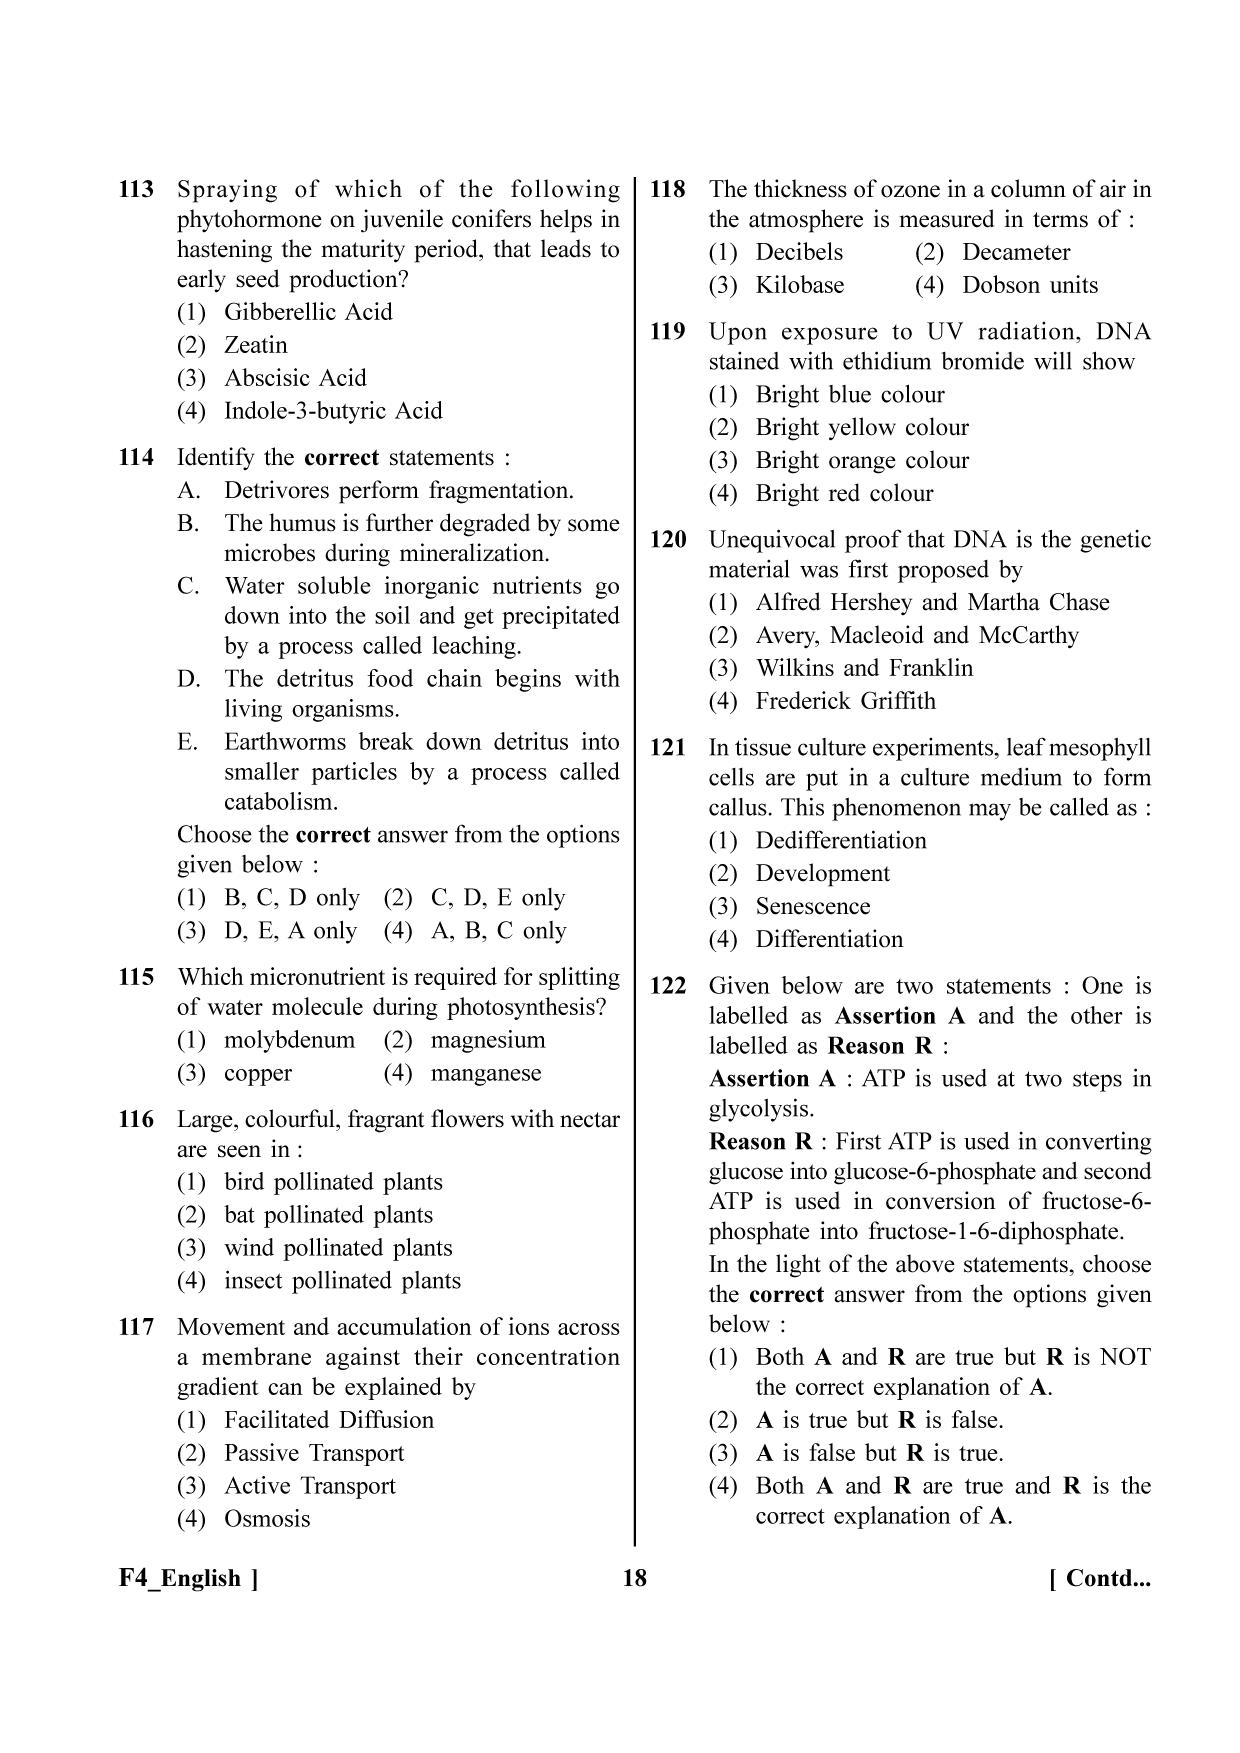 NEET 2023 F4 Question Paper - Page 18